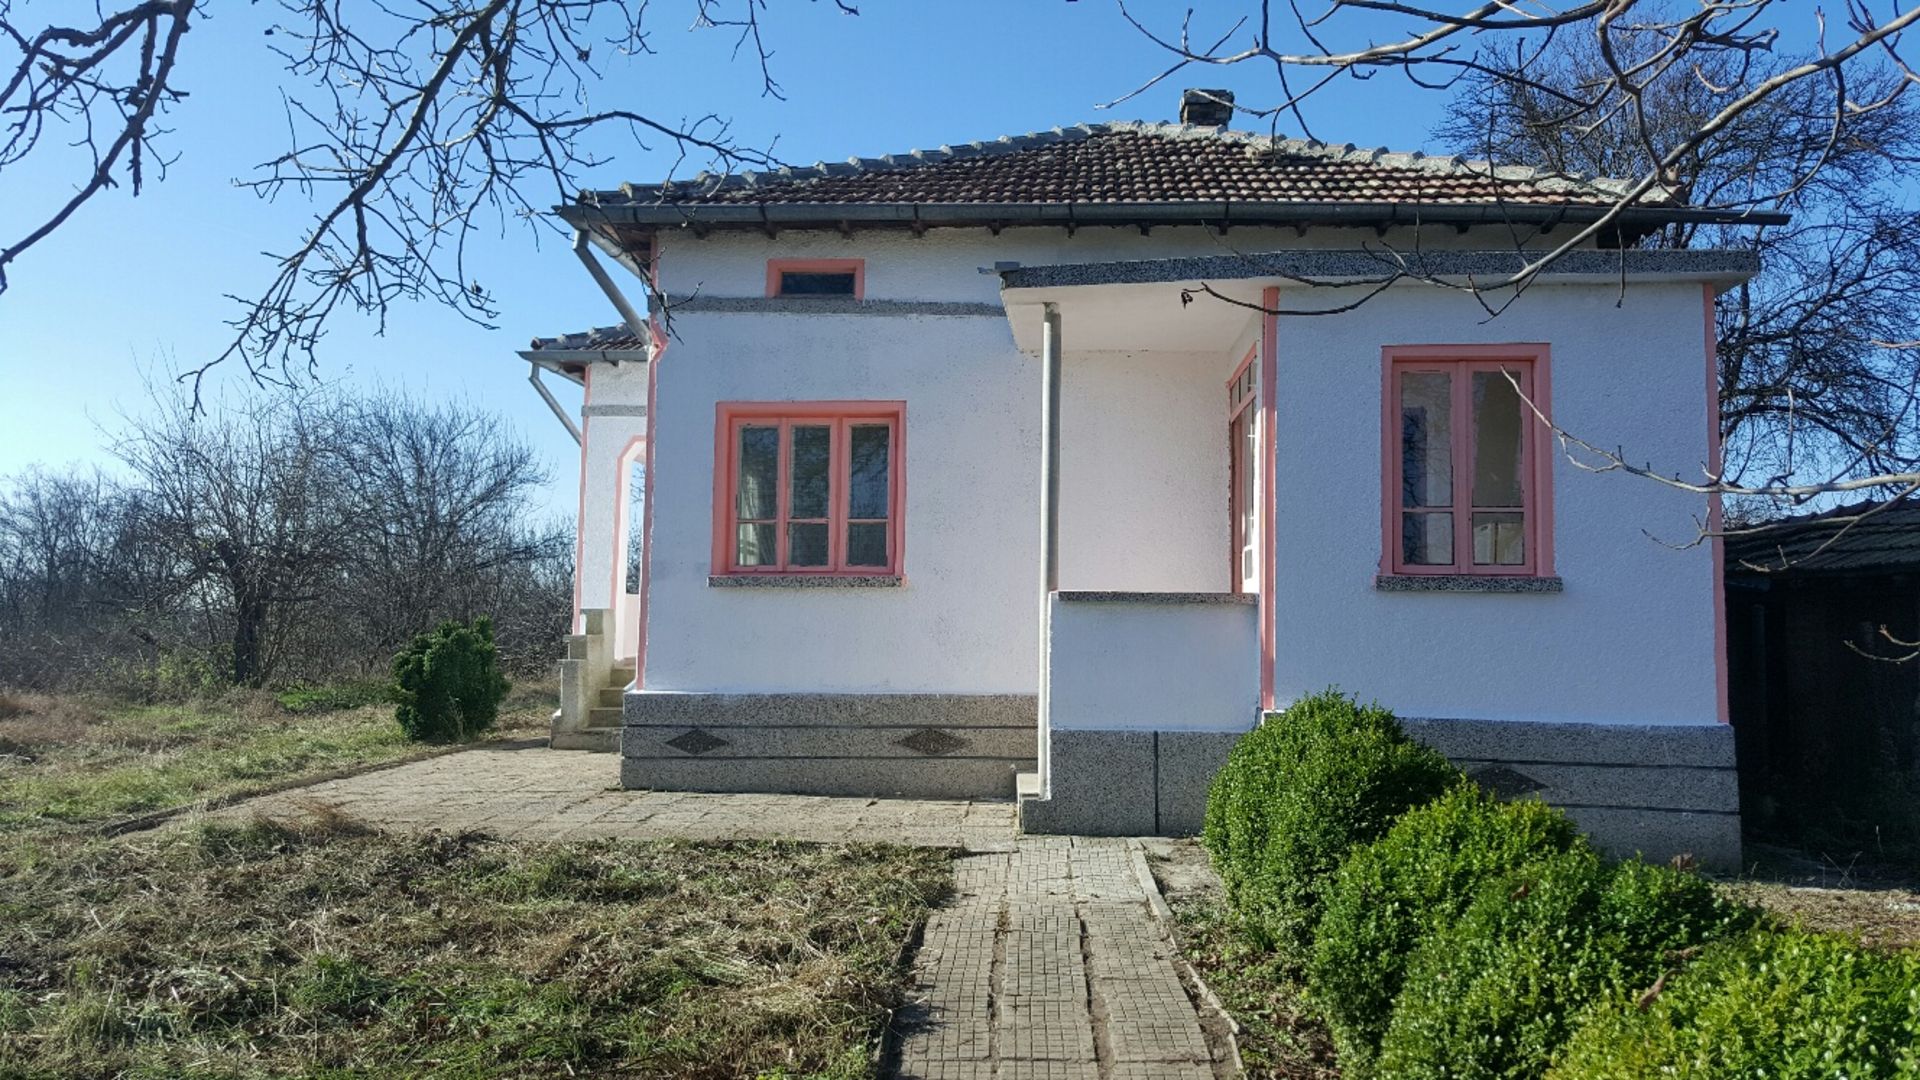 Ready to move into 5 room Bulgarian cottage for sale. With land not far from coast - Image 4 of 42